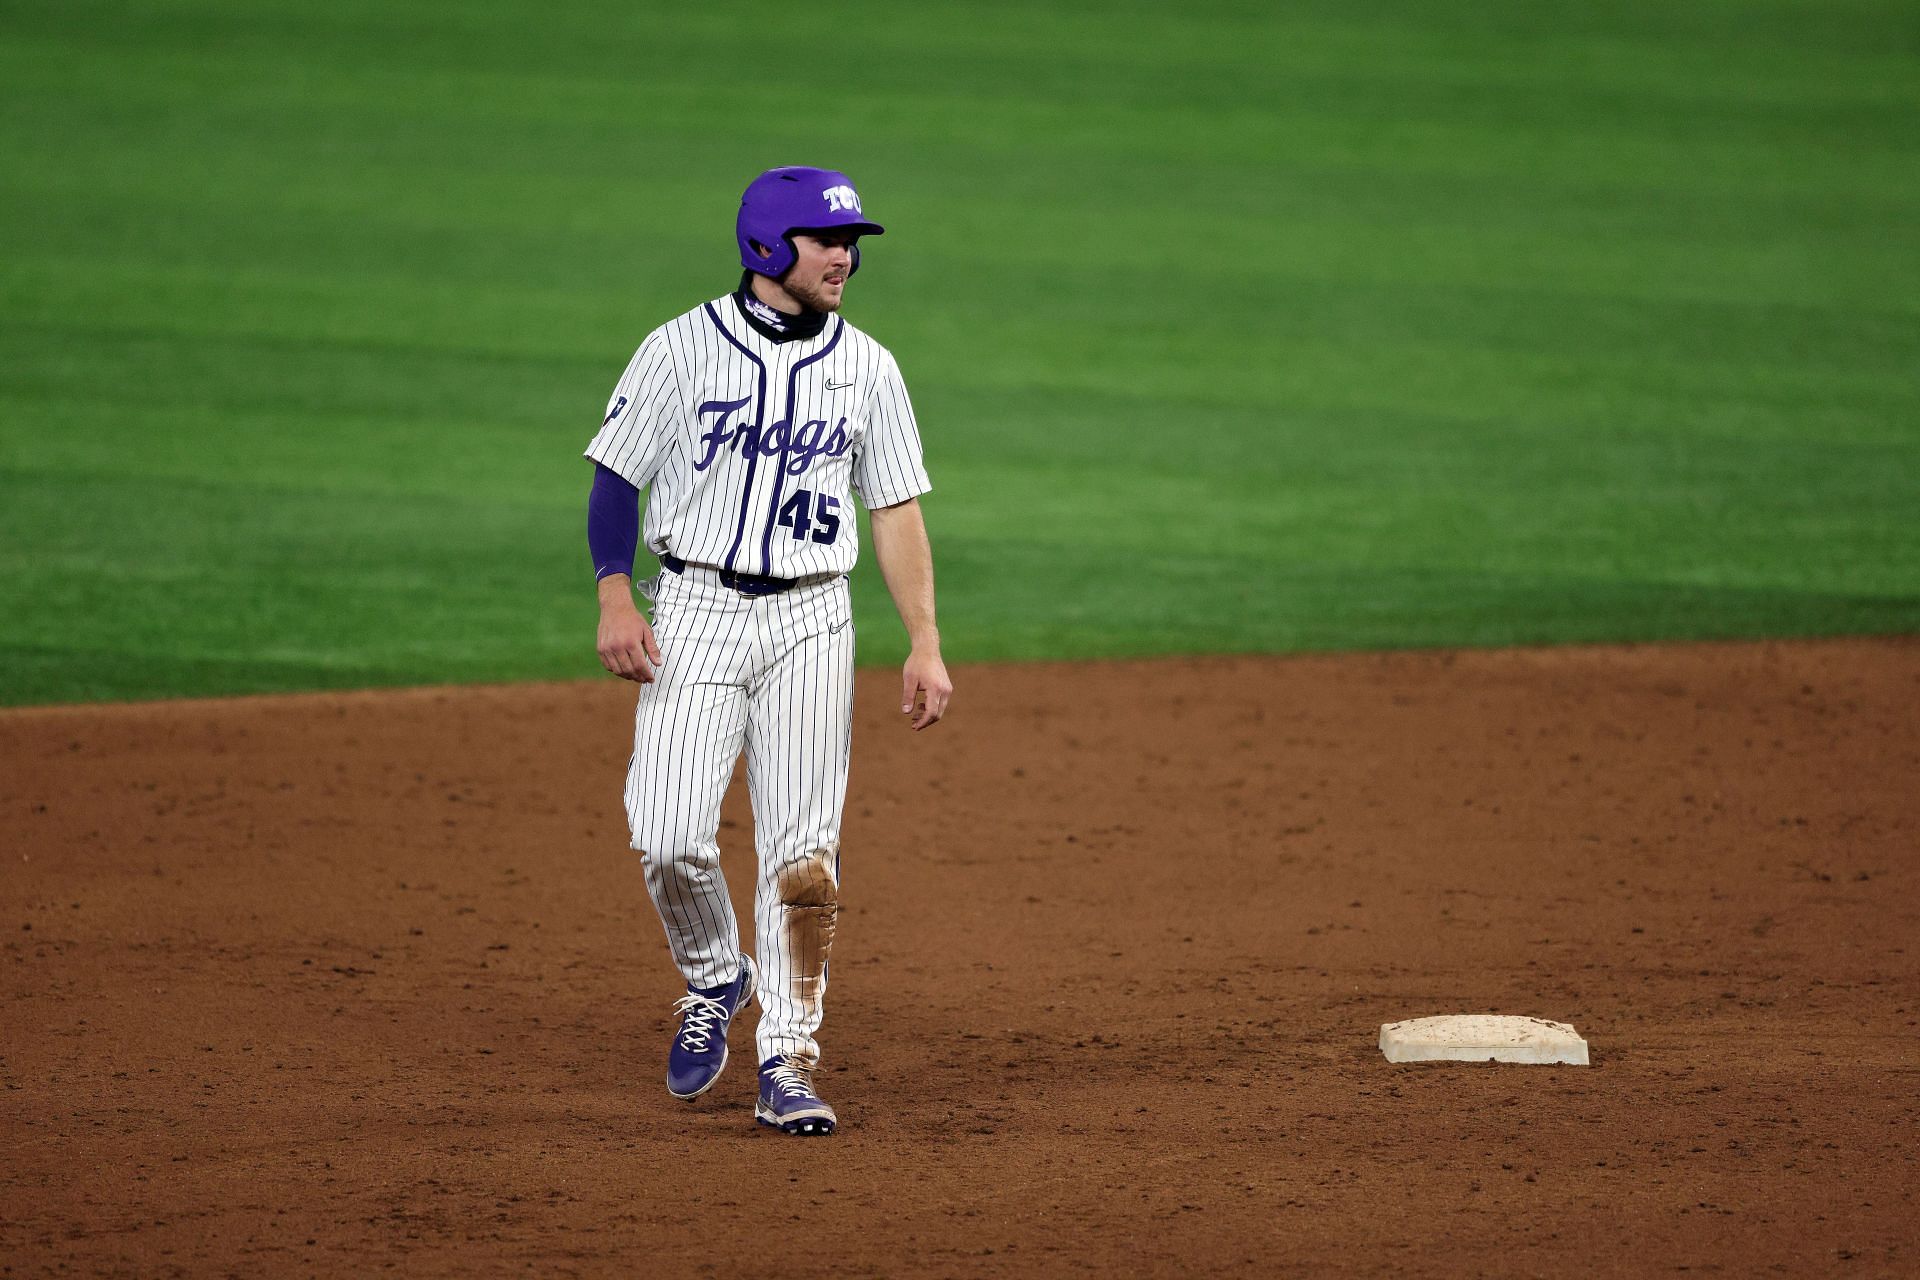 TCU baseball's CWS appearances How many times have the Horned Frogs